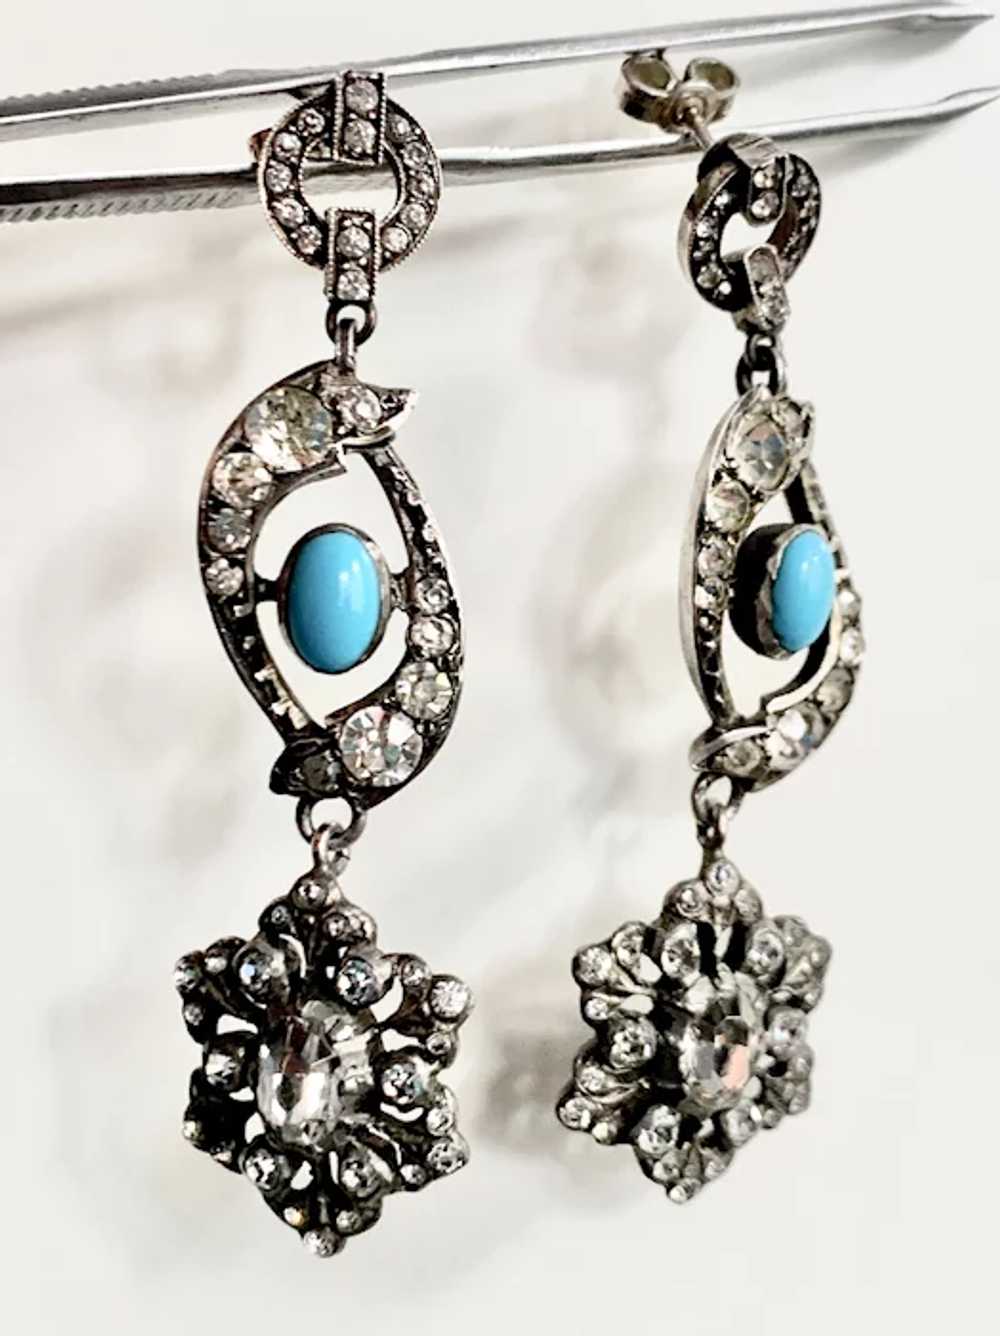 Antique Silver Paste Turquoise Chandelier Earrings - image 2